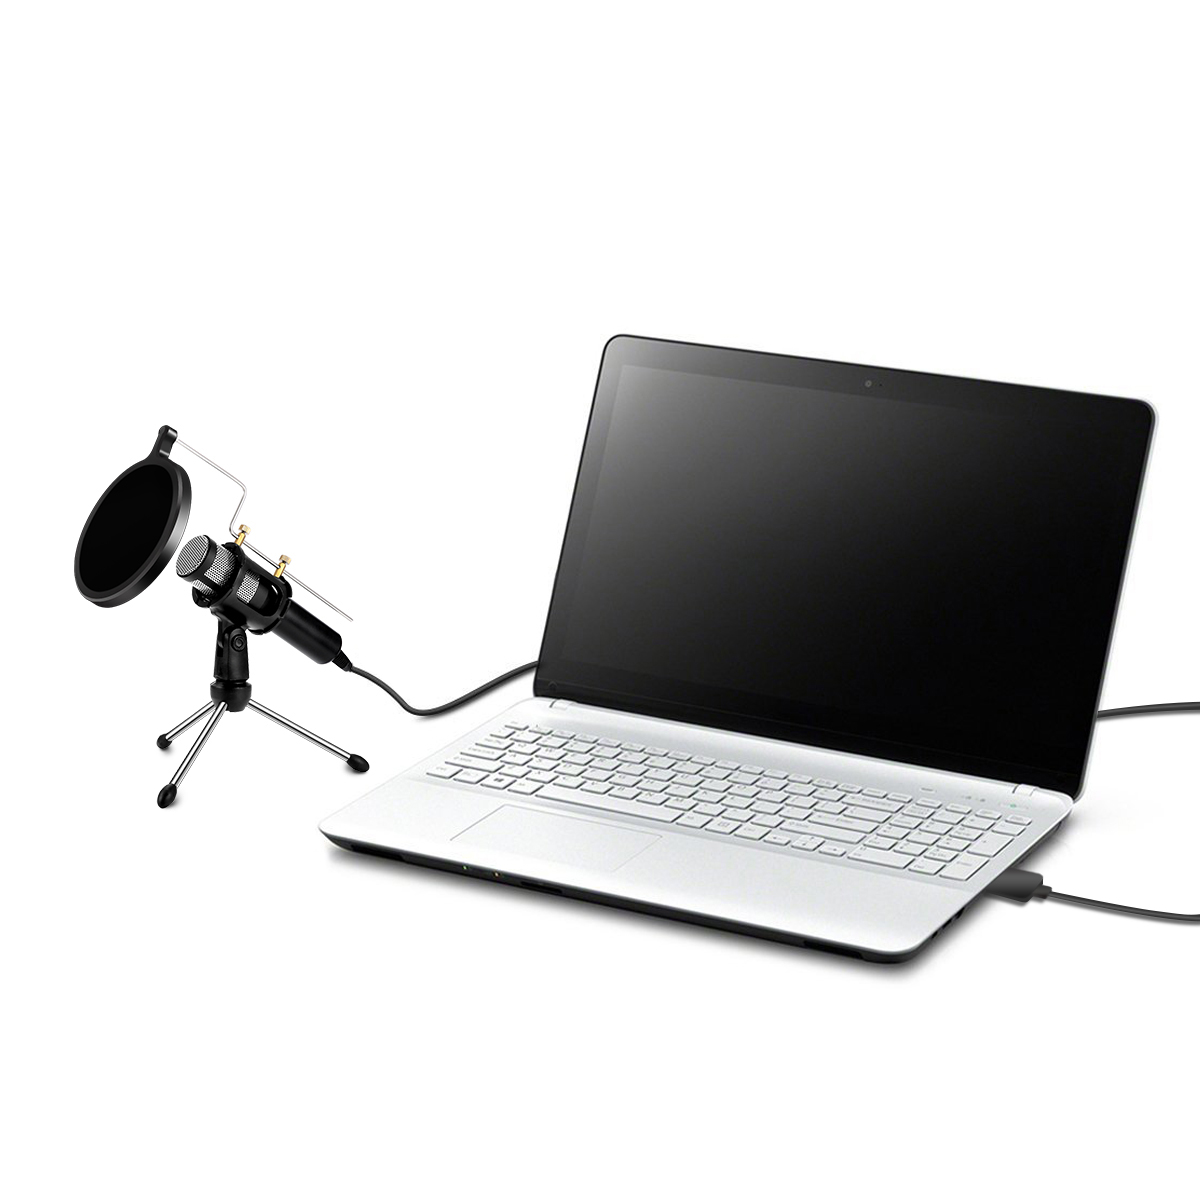 USB Professional Home Studio Condenser Microphone for Live Broadcast Podcast Recording PC Laptop for Windows